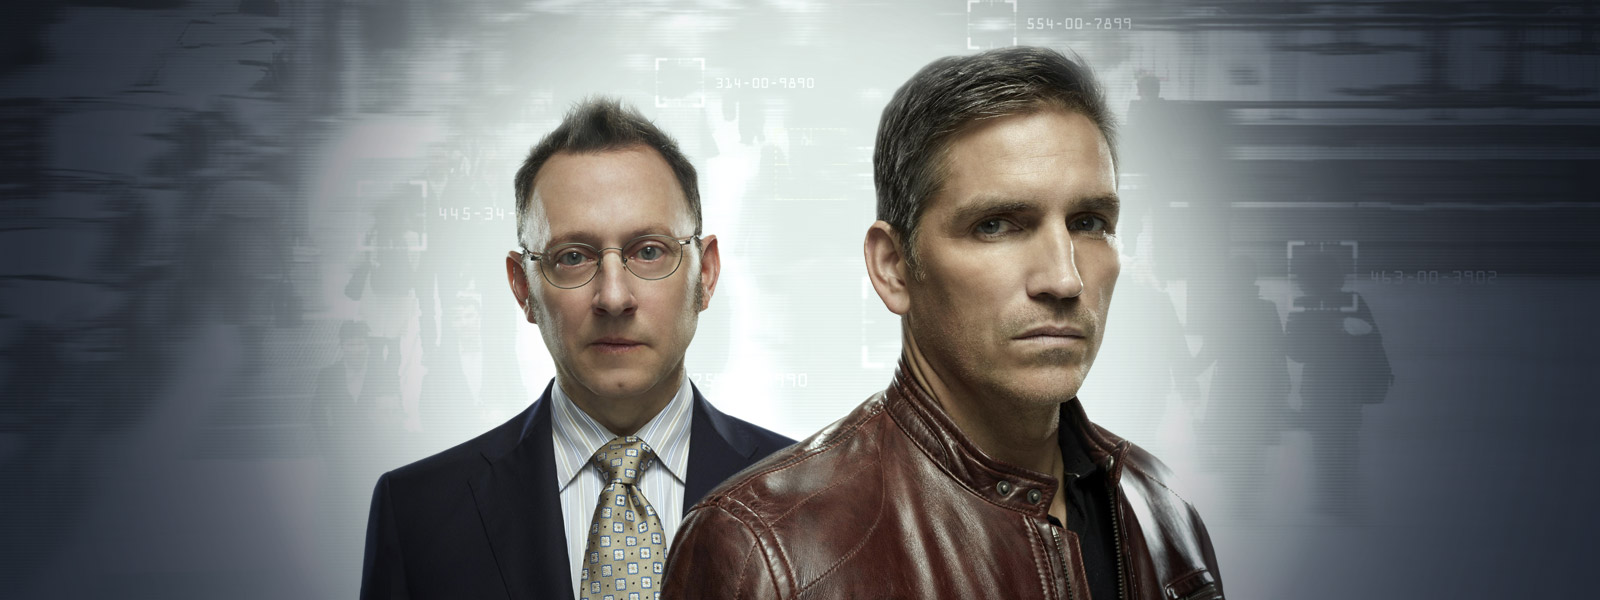 Review: Person of Interest – “The Devil’s Share”